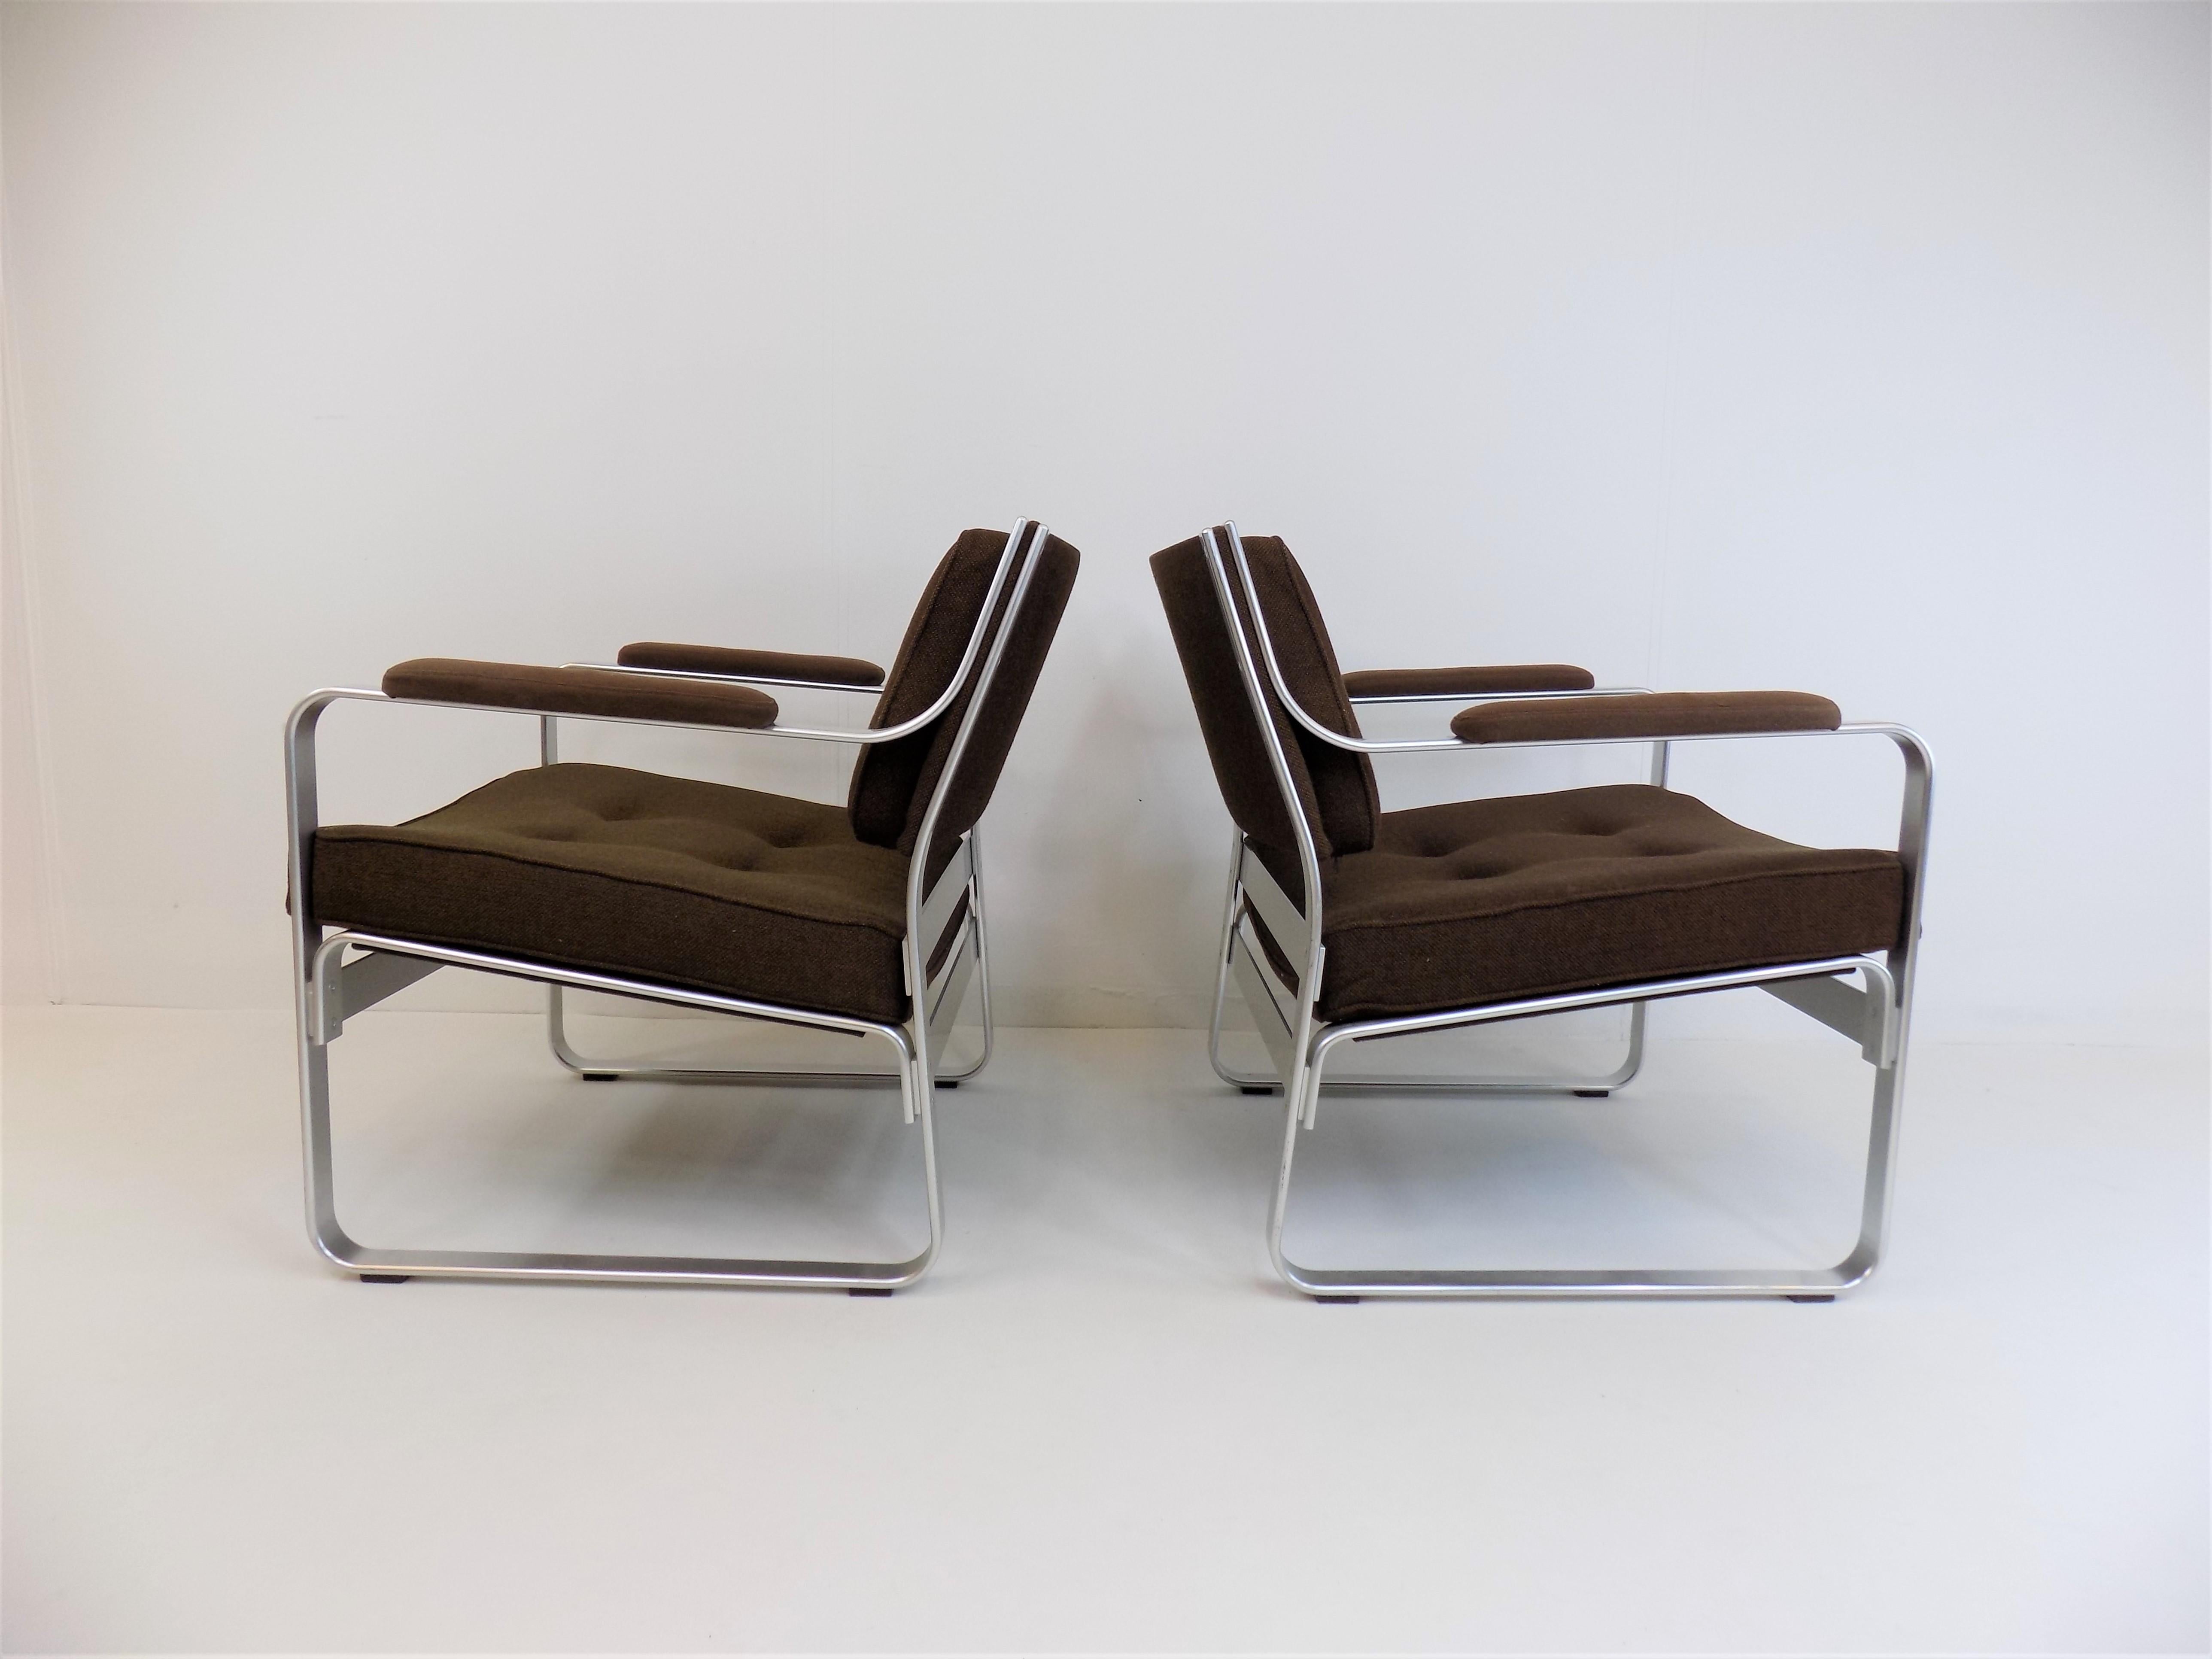 The two Mondo armchairs in the wider and deeper lounge chair versions are in excellent, almost new condition. The brown fabric cover of the armchair shows almost no signs of wear, the aluminum frames are immaculate. These armchairs are characterized